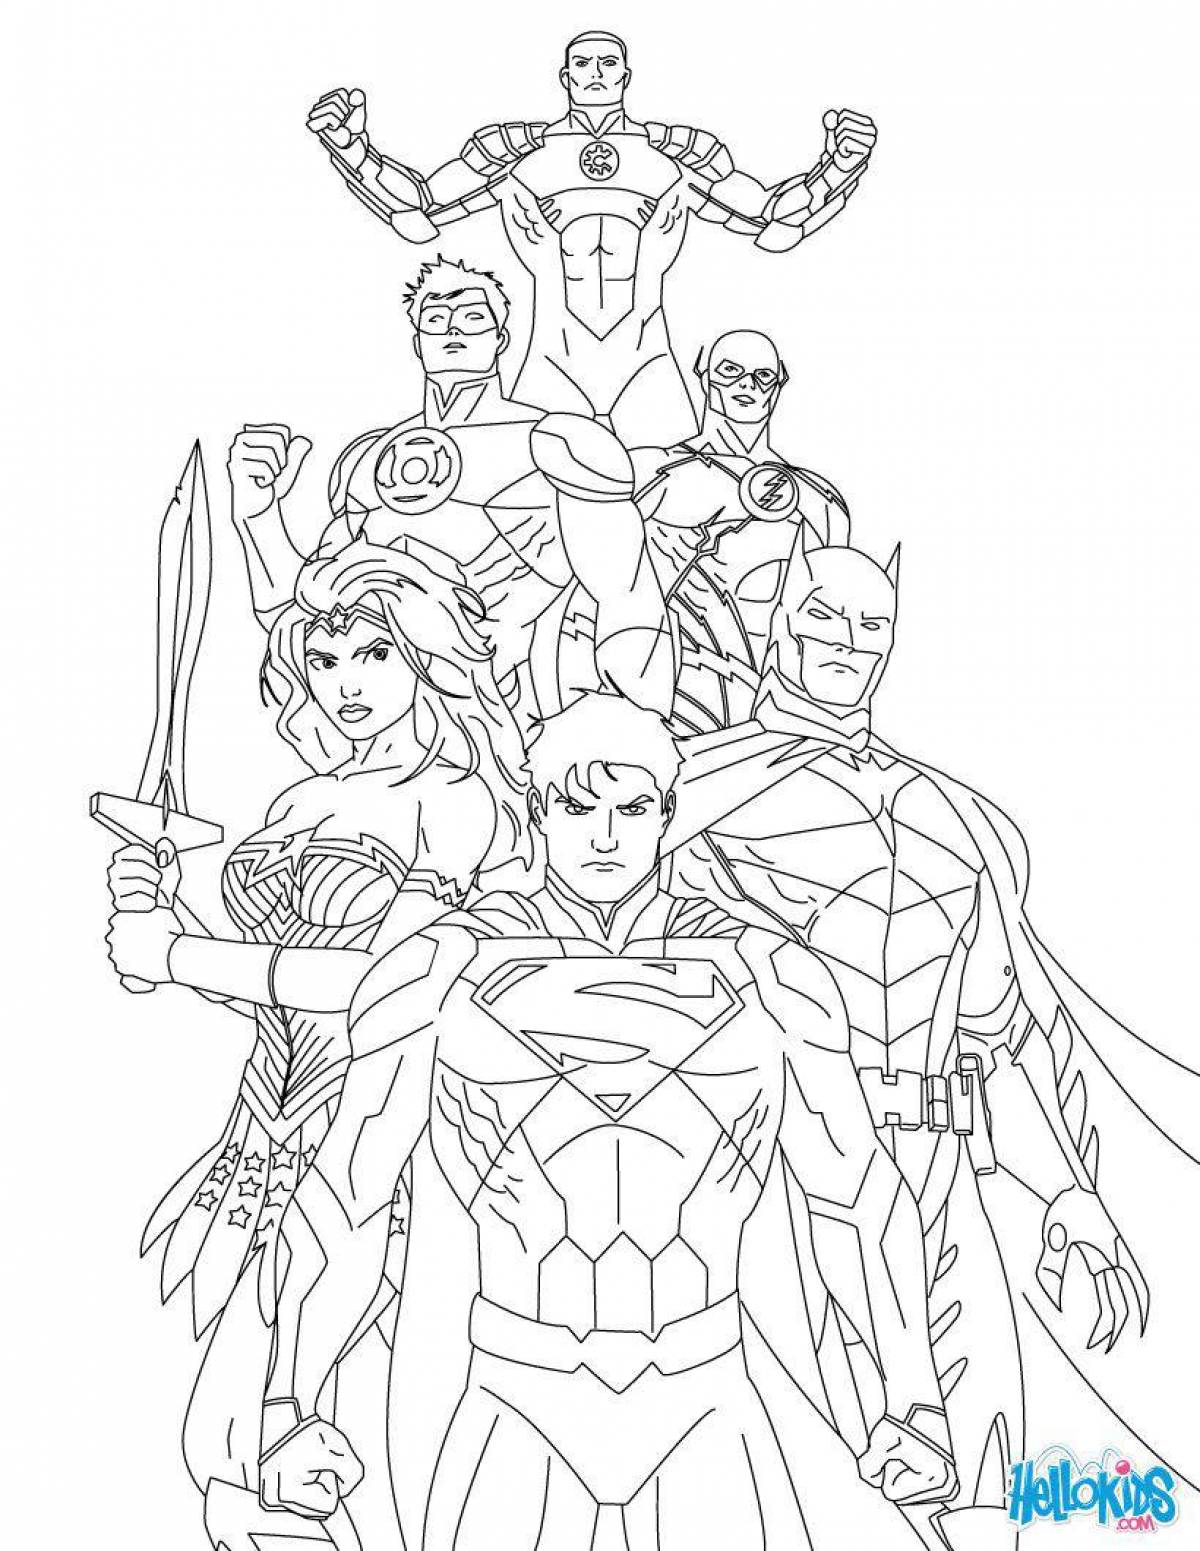 Exquisite superhero coloring pages for boys